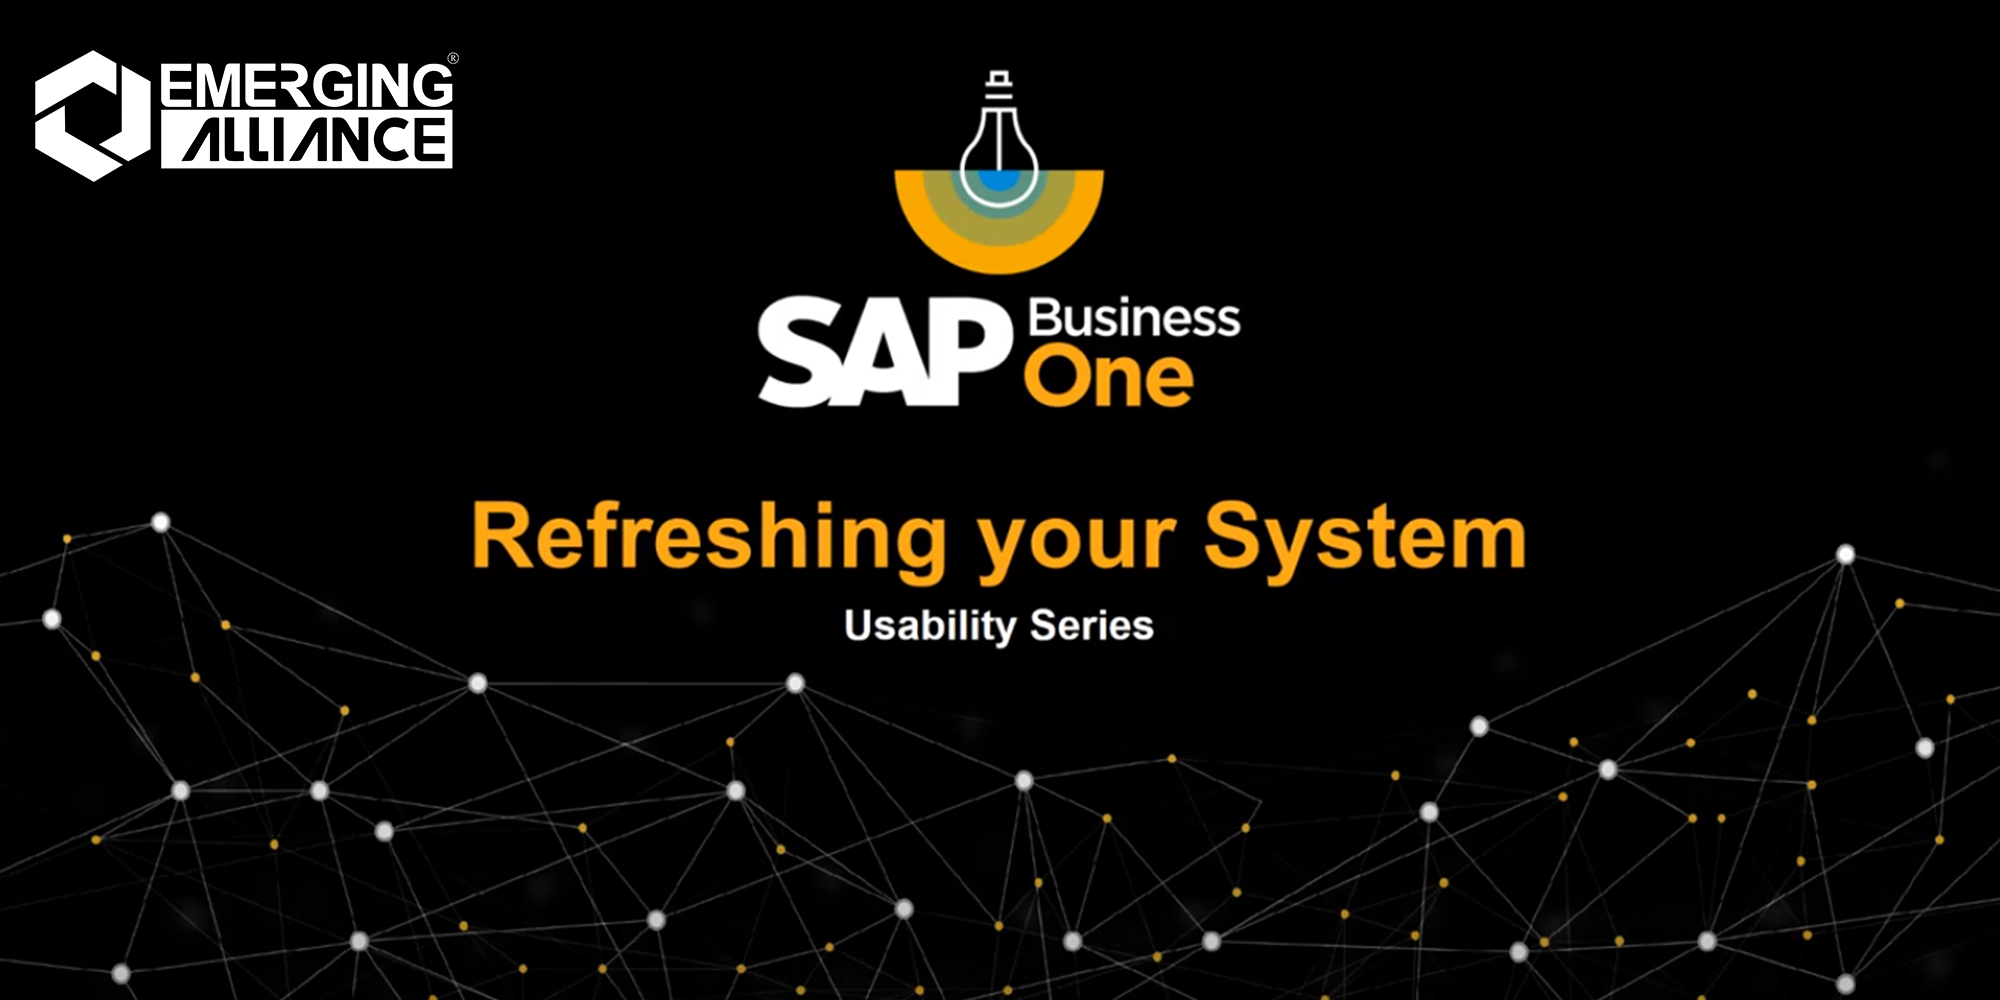 sap b1 usability series refreshing your system